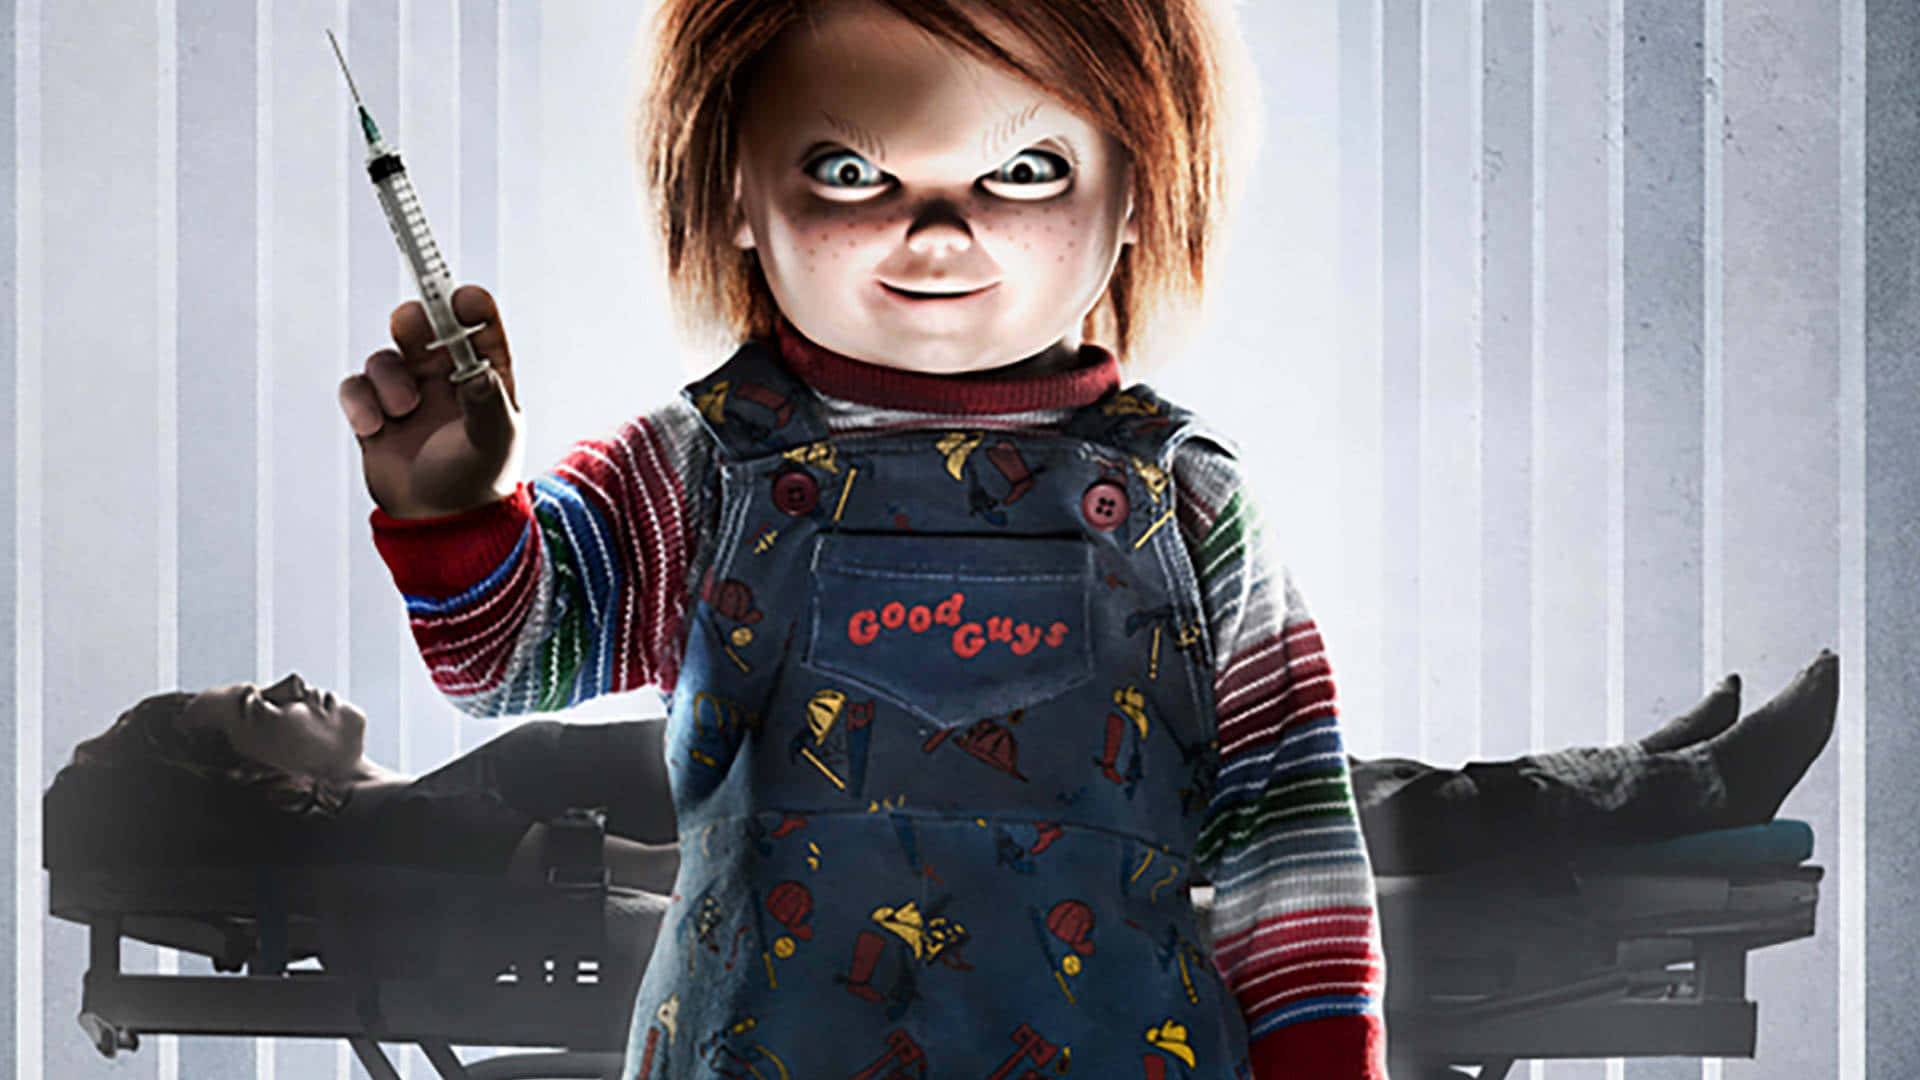 Welcome to a World of Terror with Chucky